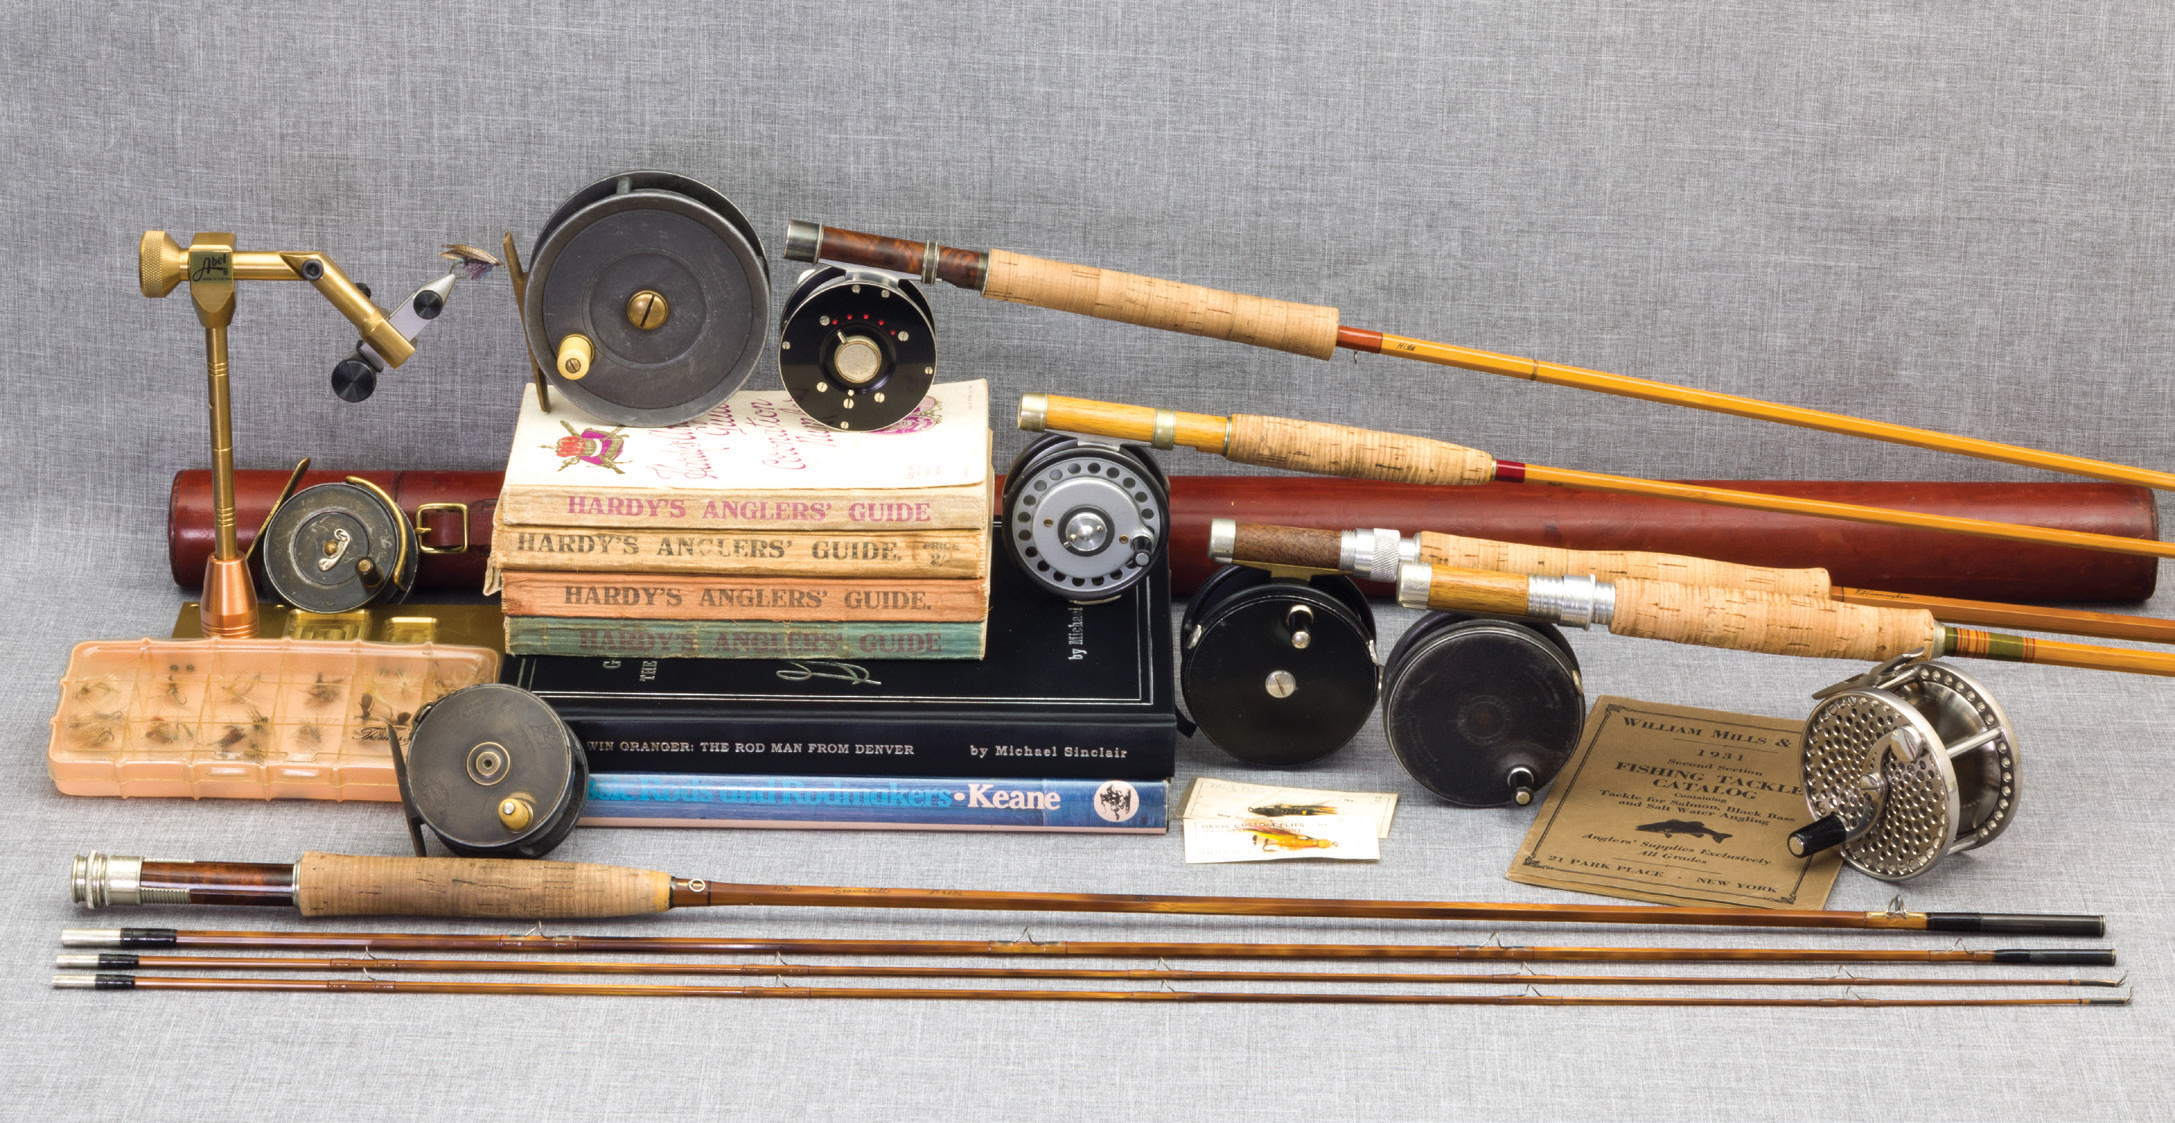 Hardy - Part Vintage Fishing Rod along with various other vintage